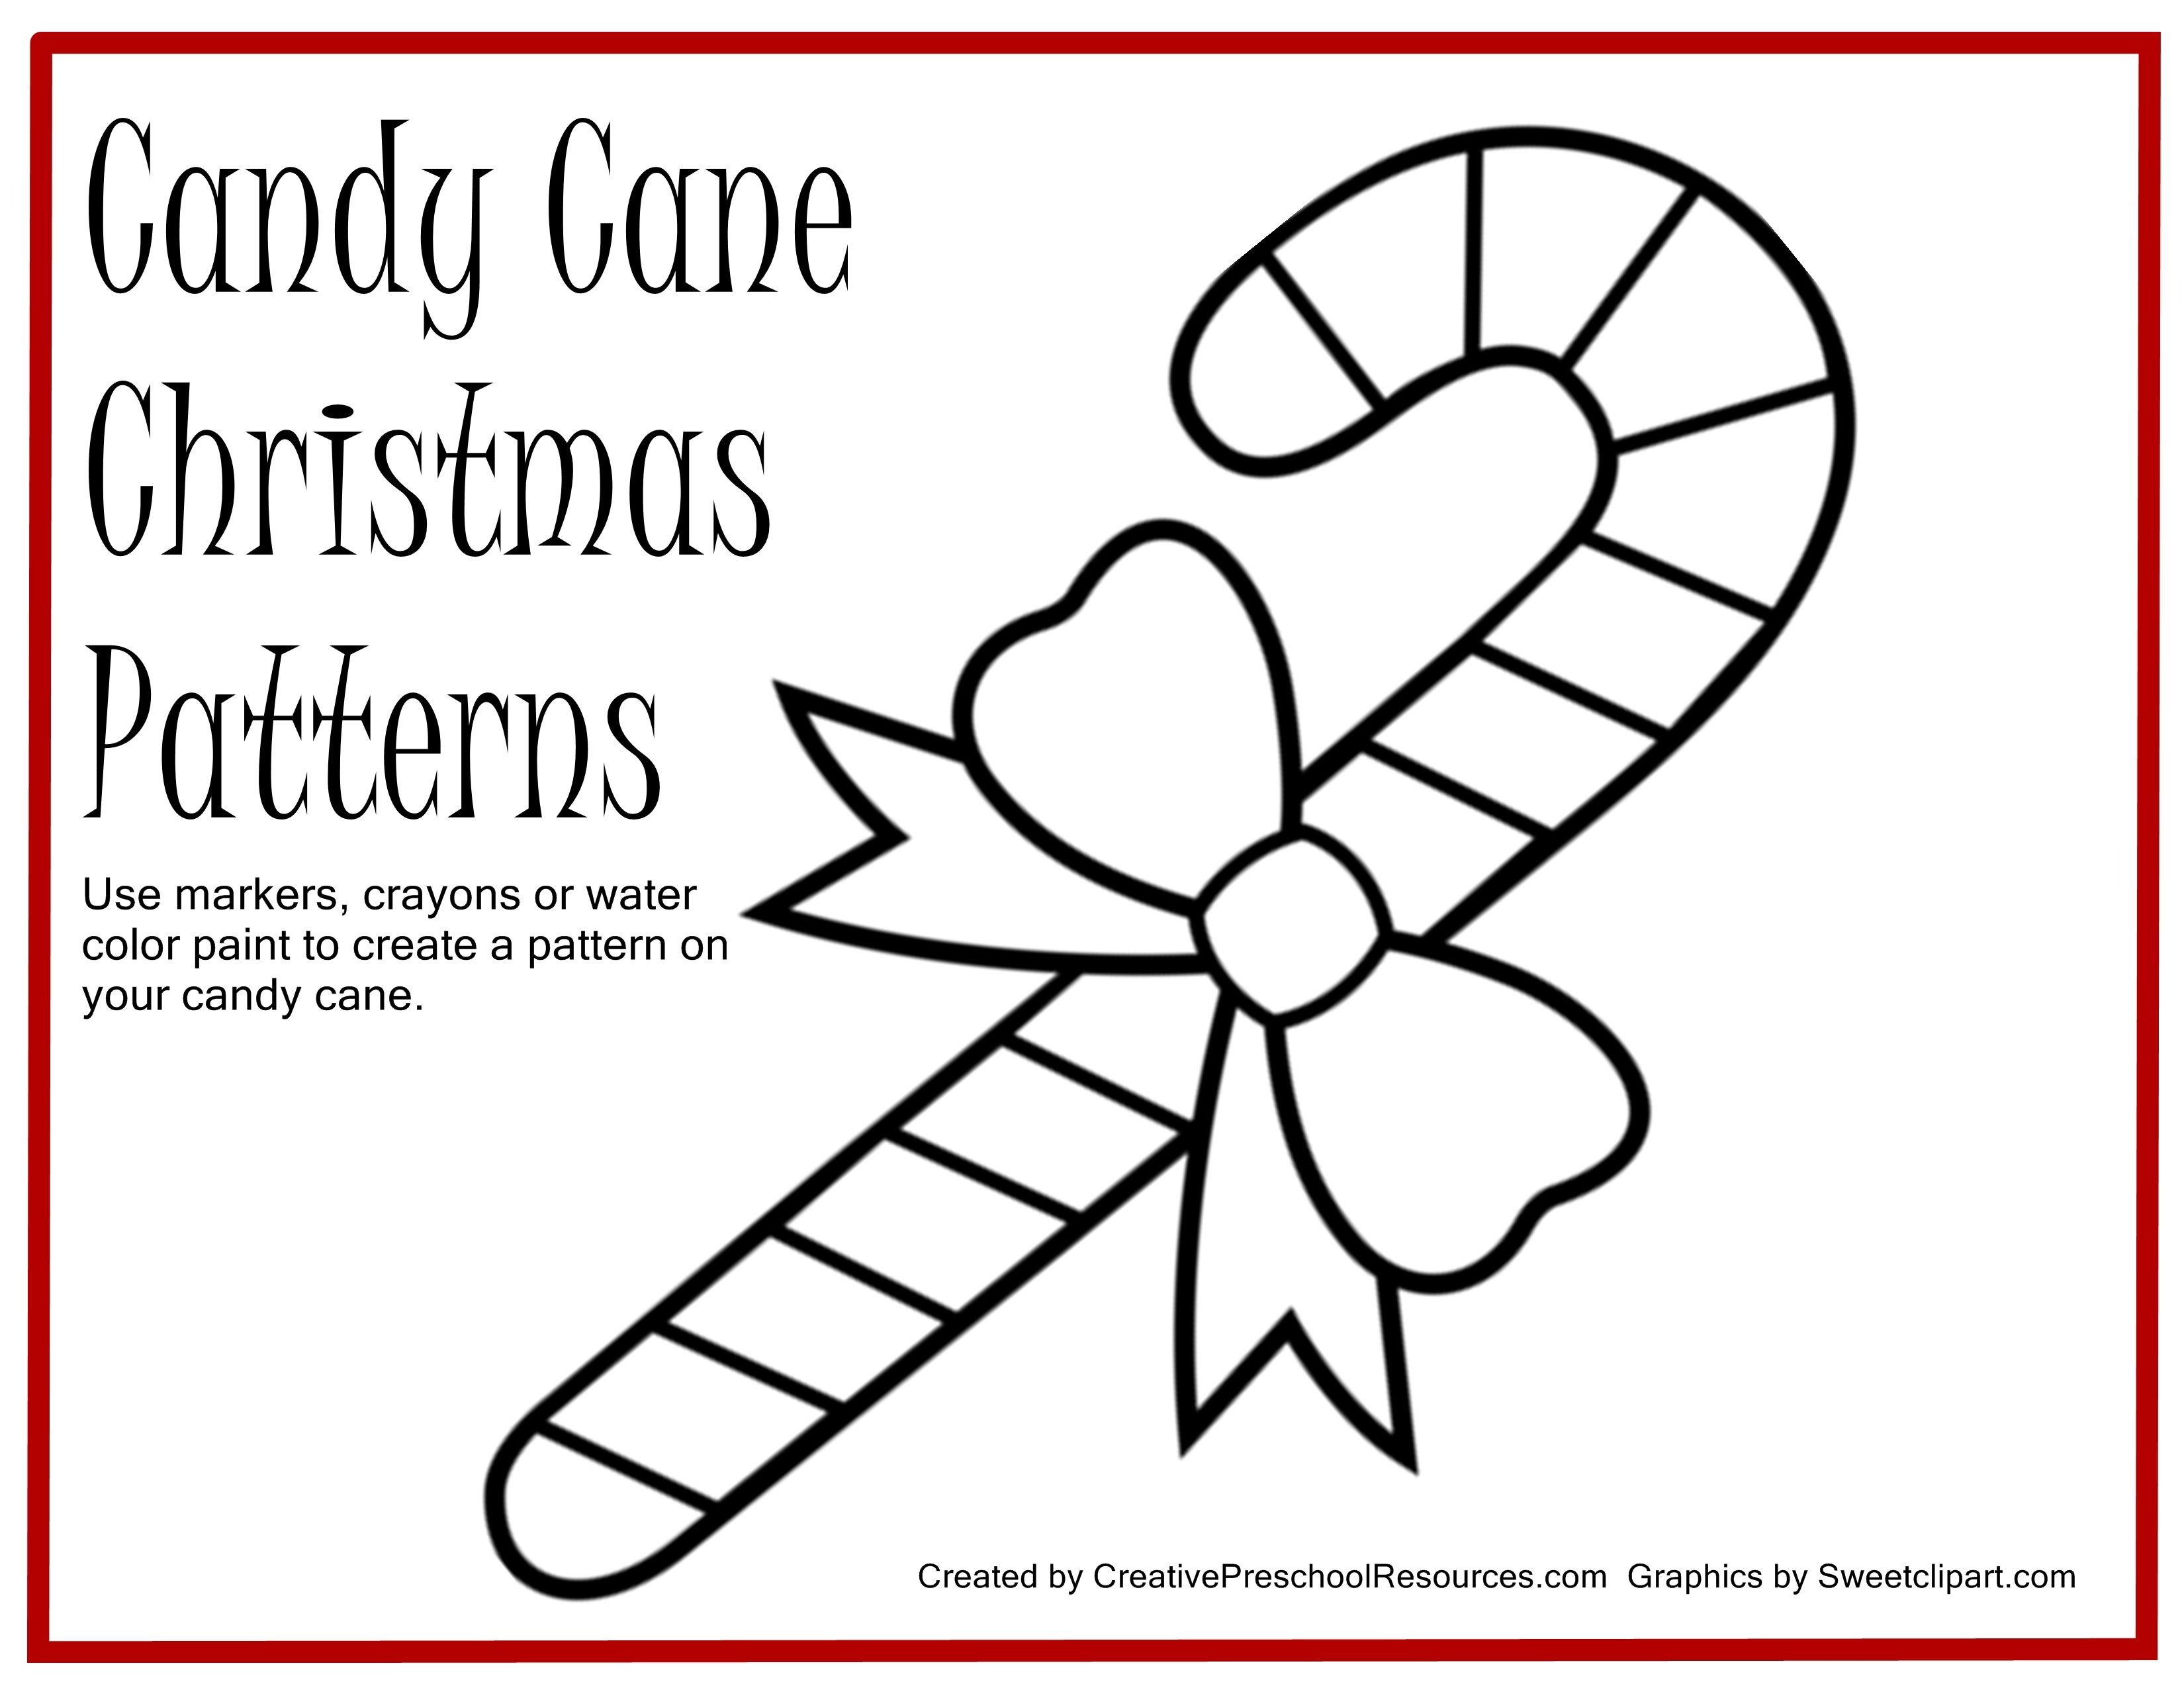 Free Printable For Painting Candy Cane Patterns | Preschool Ideas - Free Candy Cane Template Printable